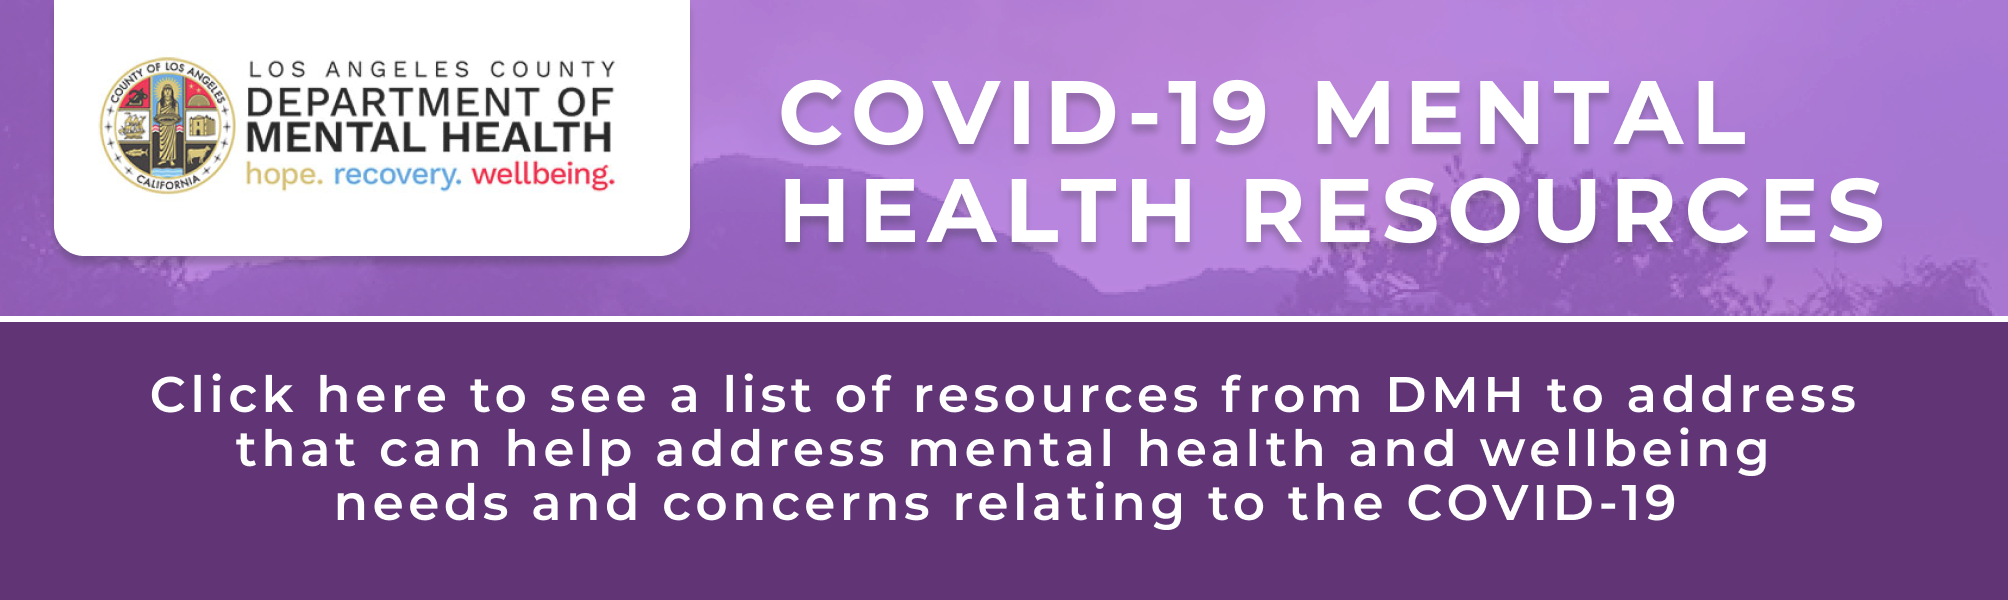 Department of Mental Health Resources